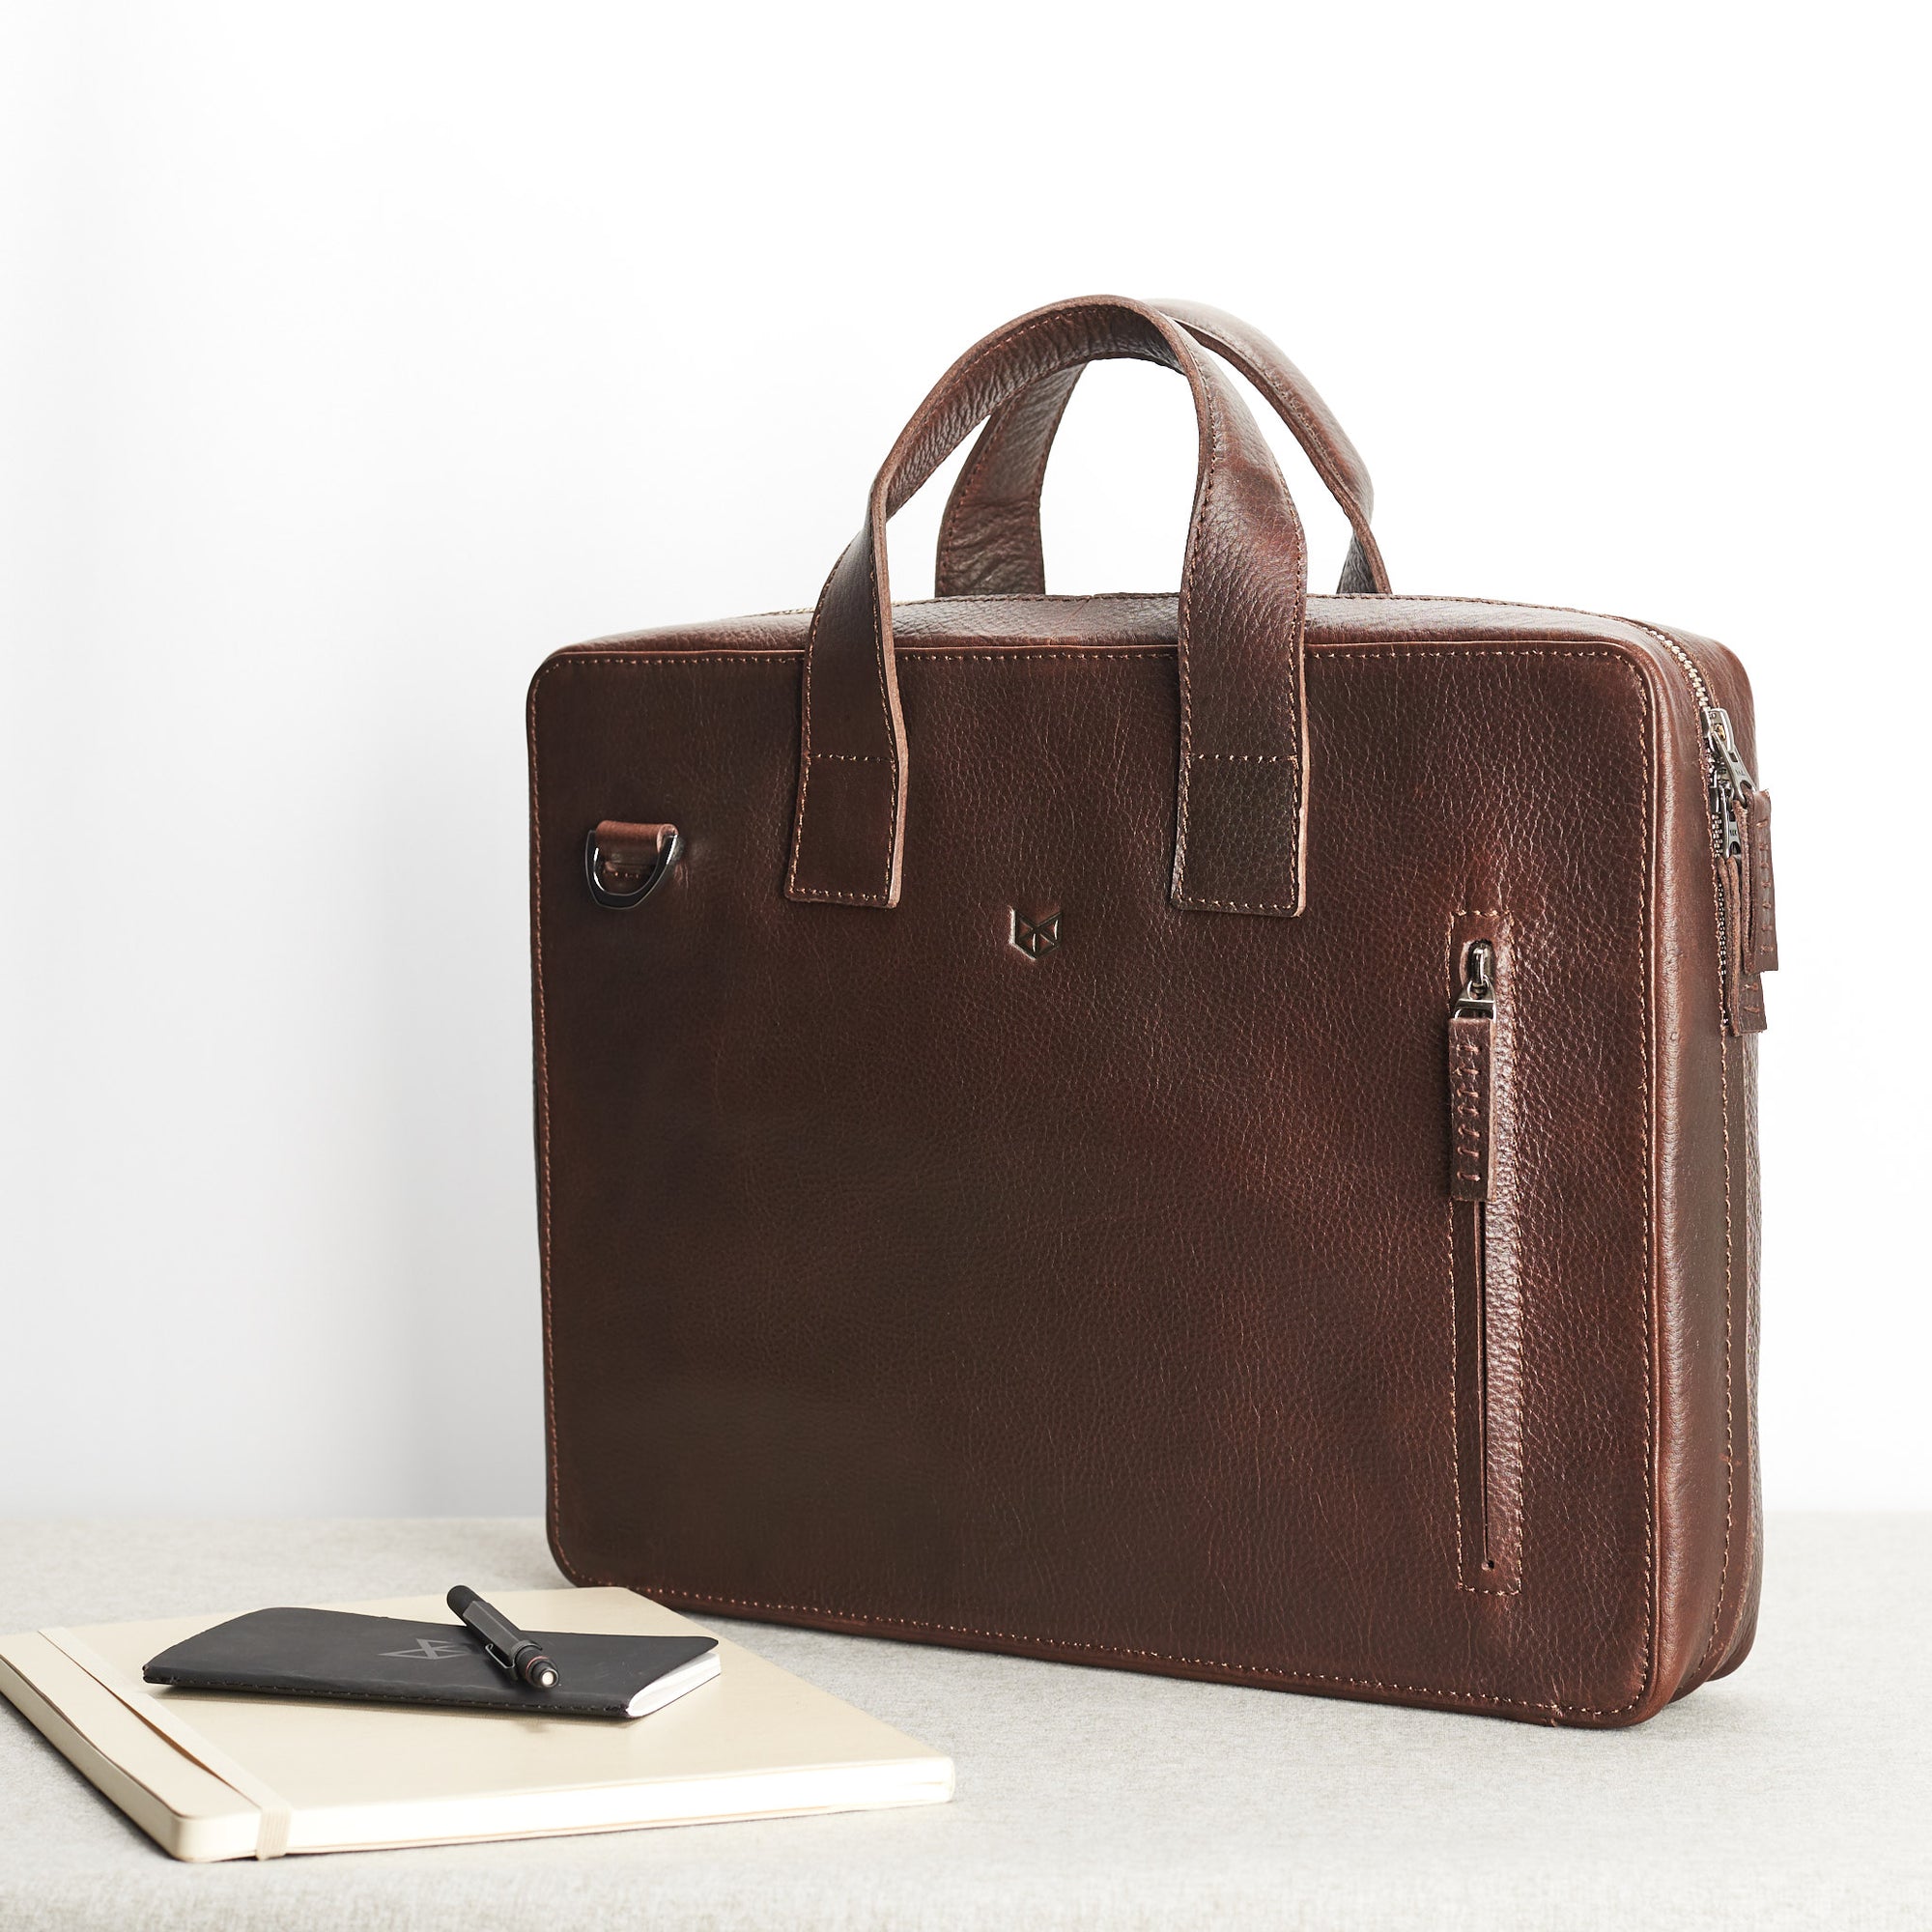 Style. Soft leather briefcase dark brown color